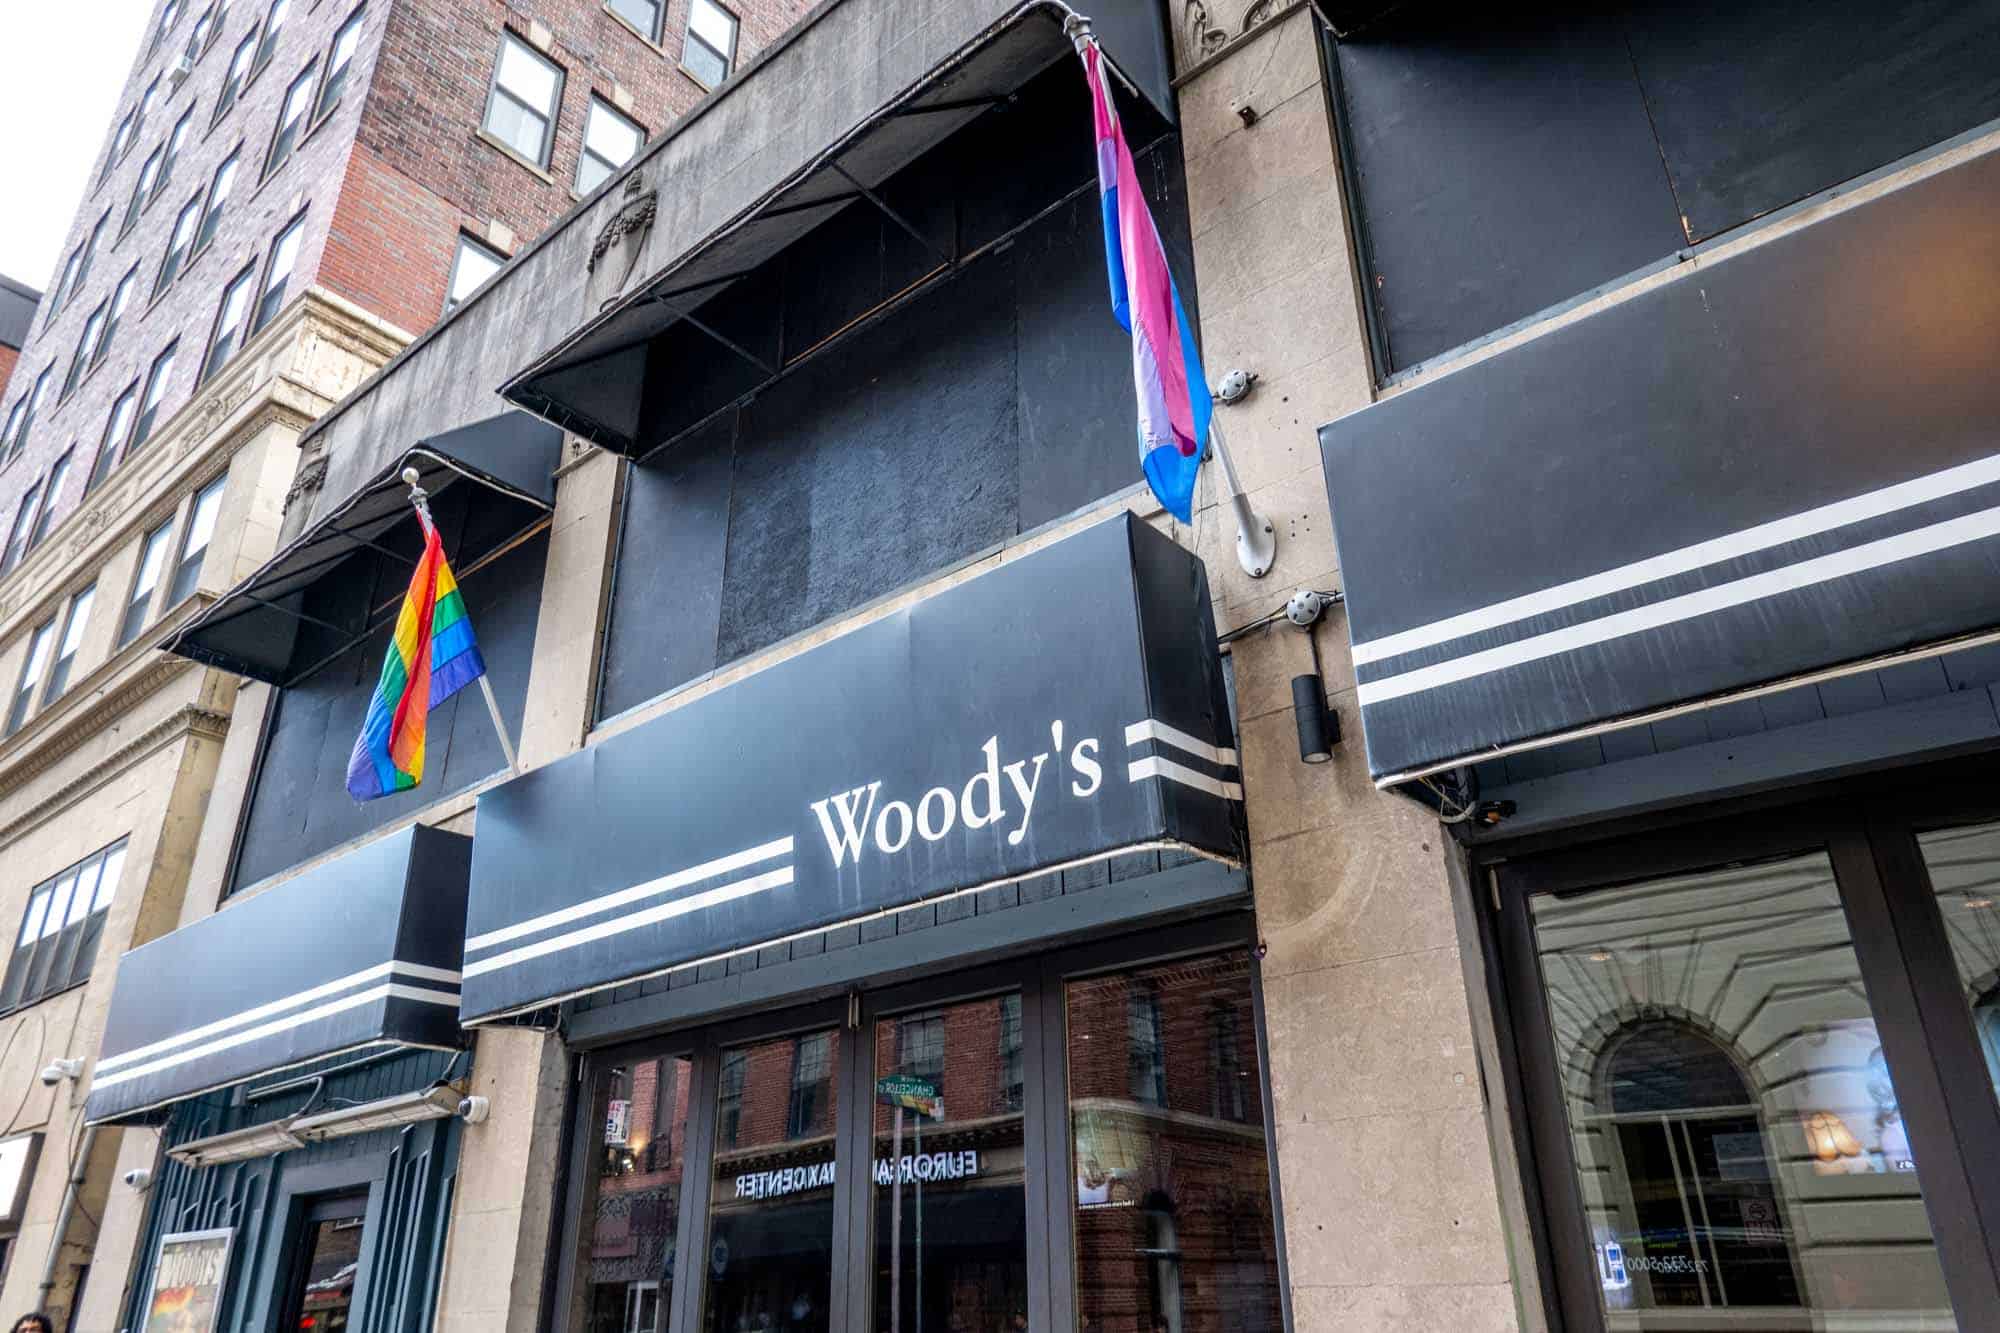 Exterior of Woody's Bar in Philly